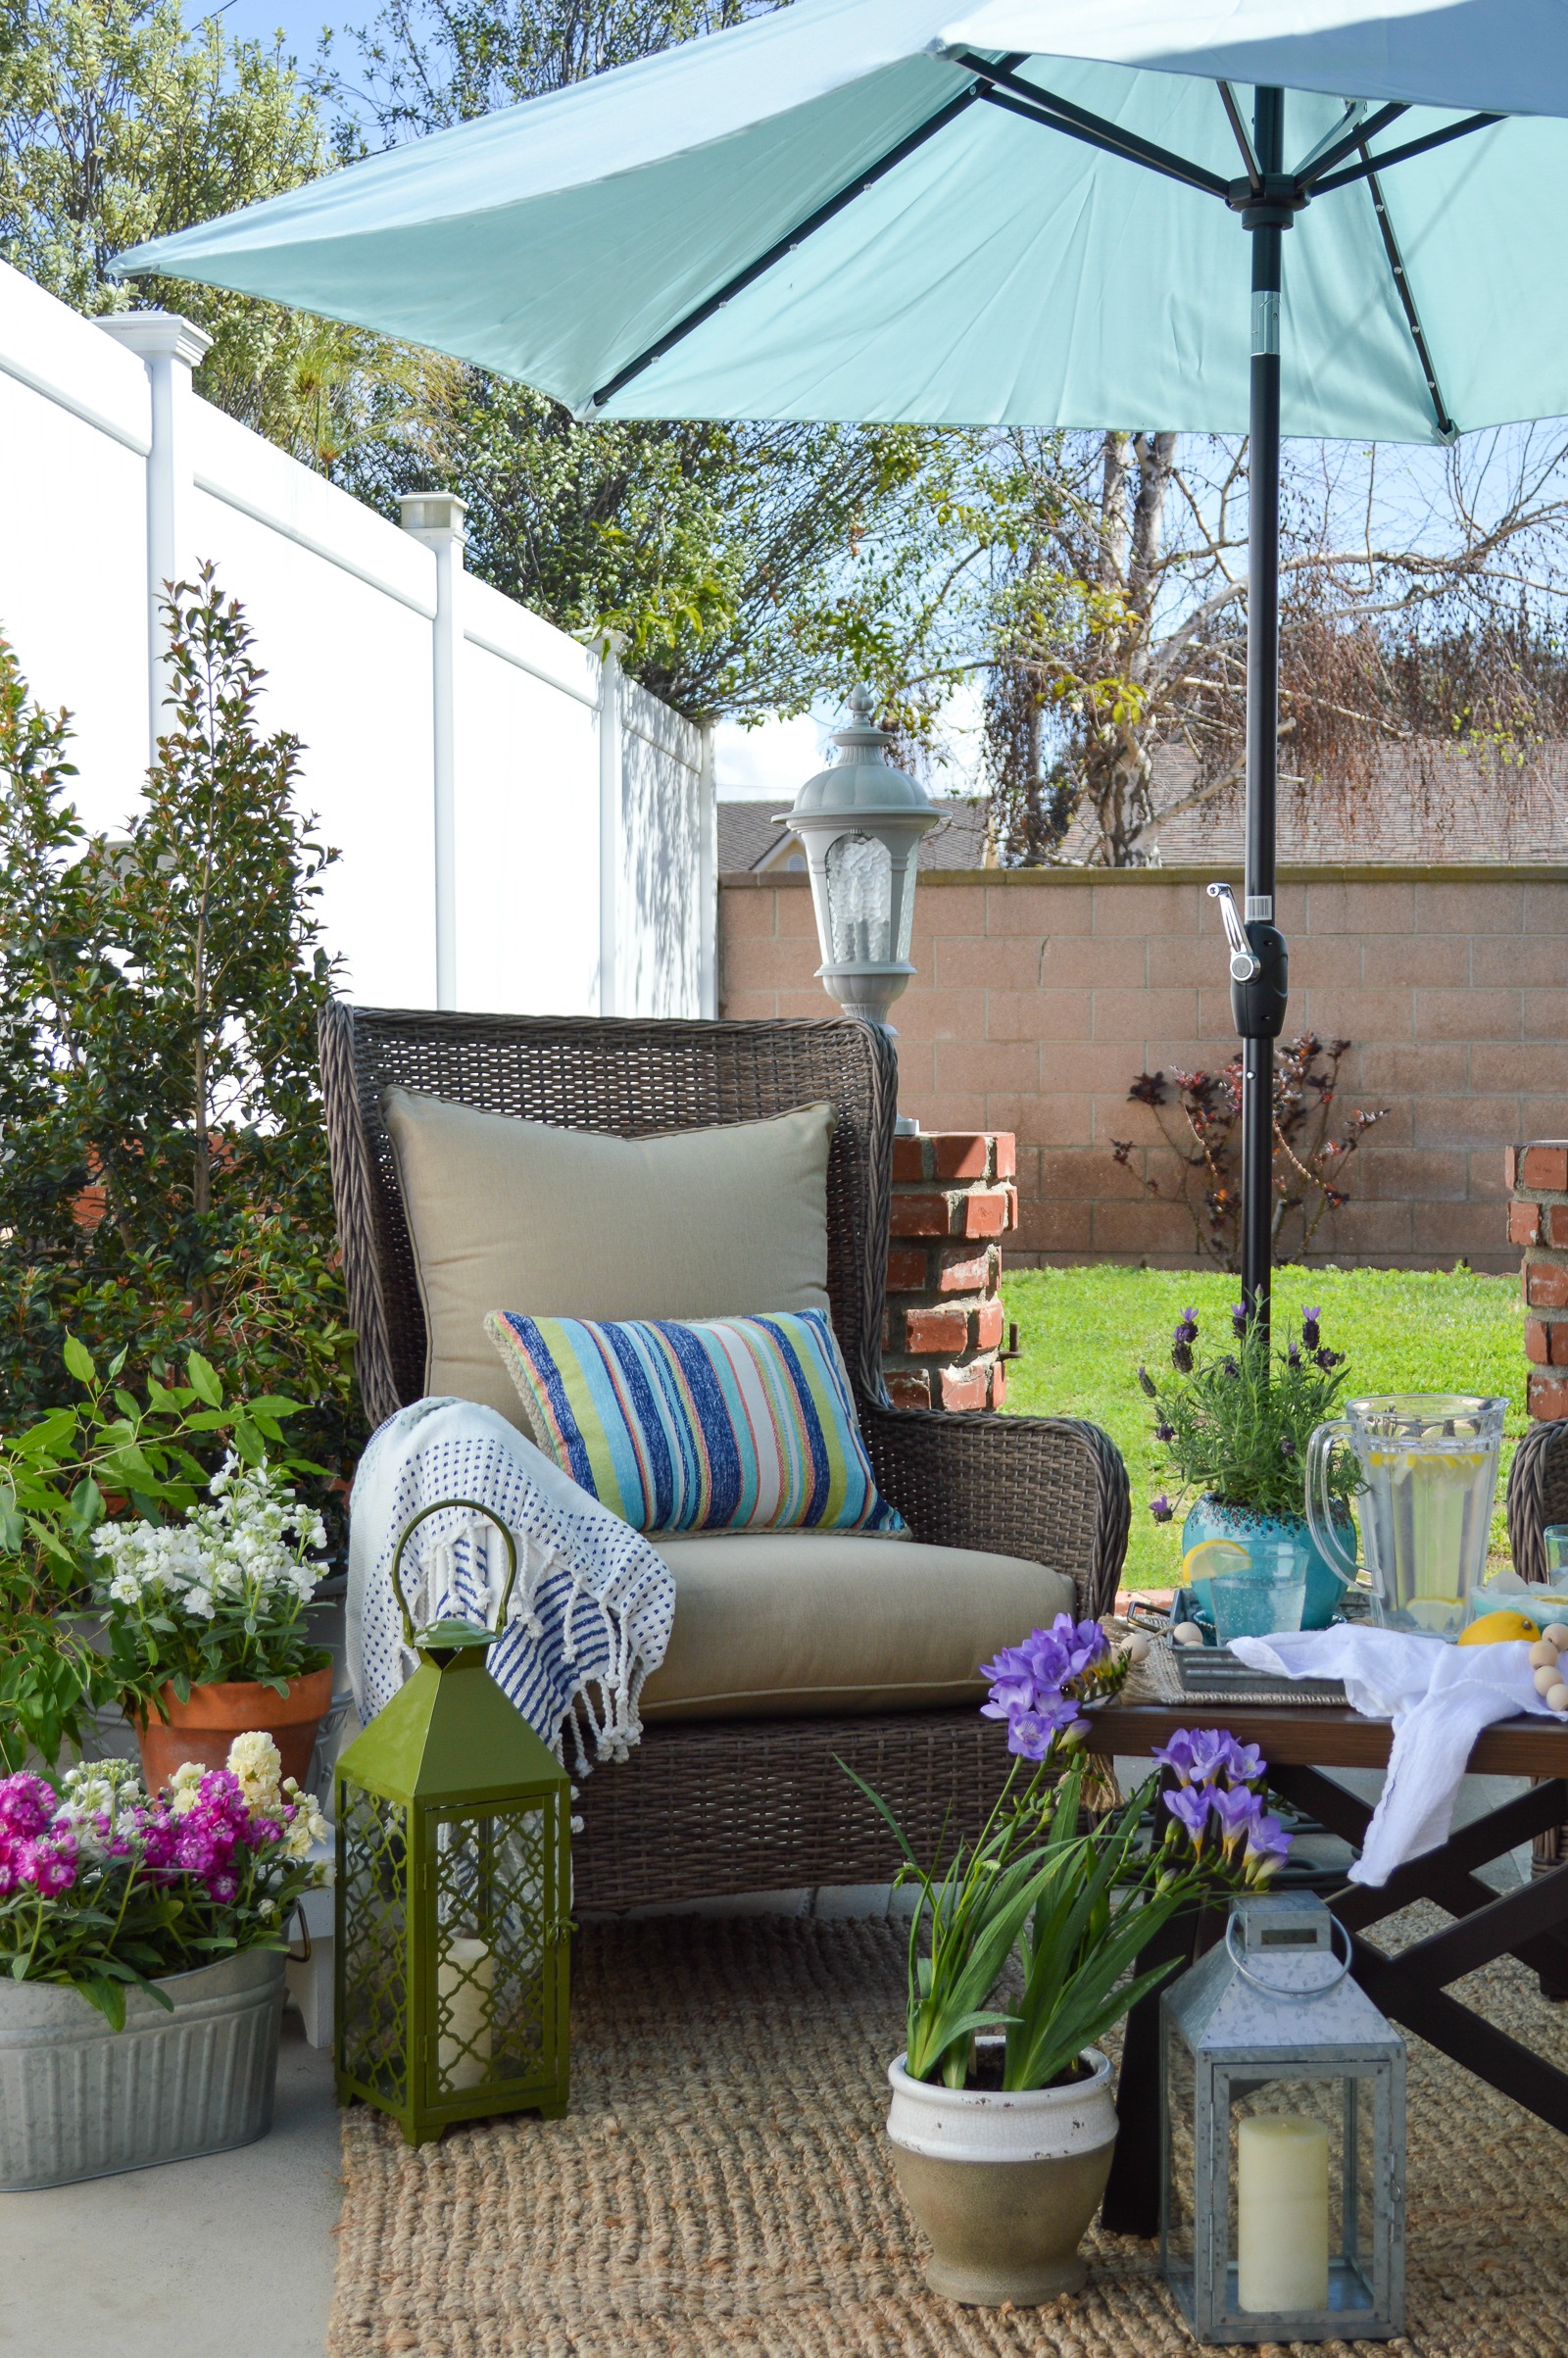 Small Space Patio Decorating Ideas with Really Comfortable Outdoor Furniture www.foxhollowcottage.com #sponsored with Better Homes & Gardens. Find it at Walmart